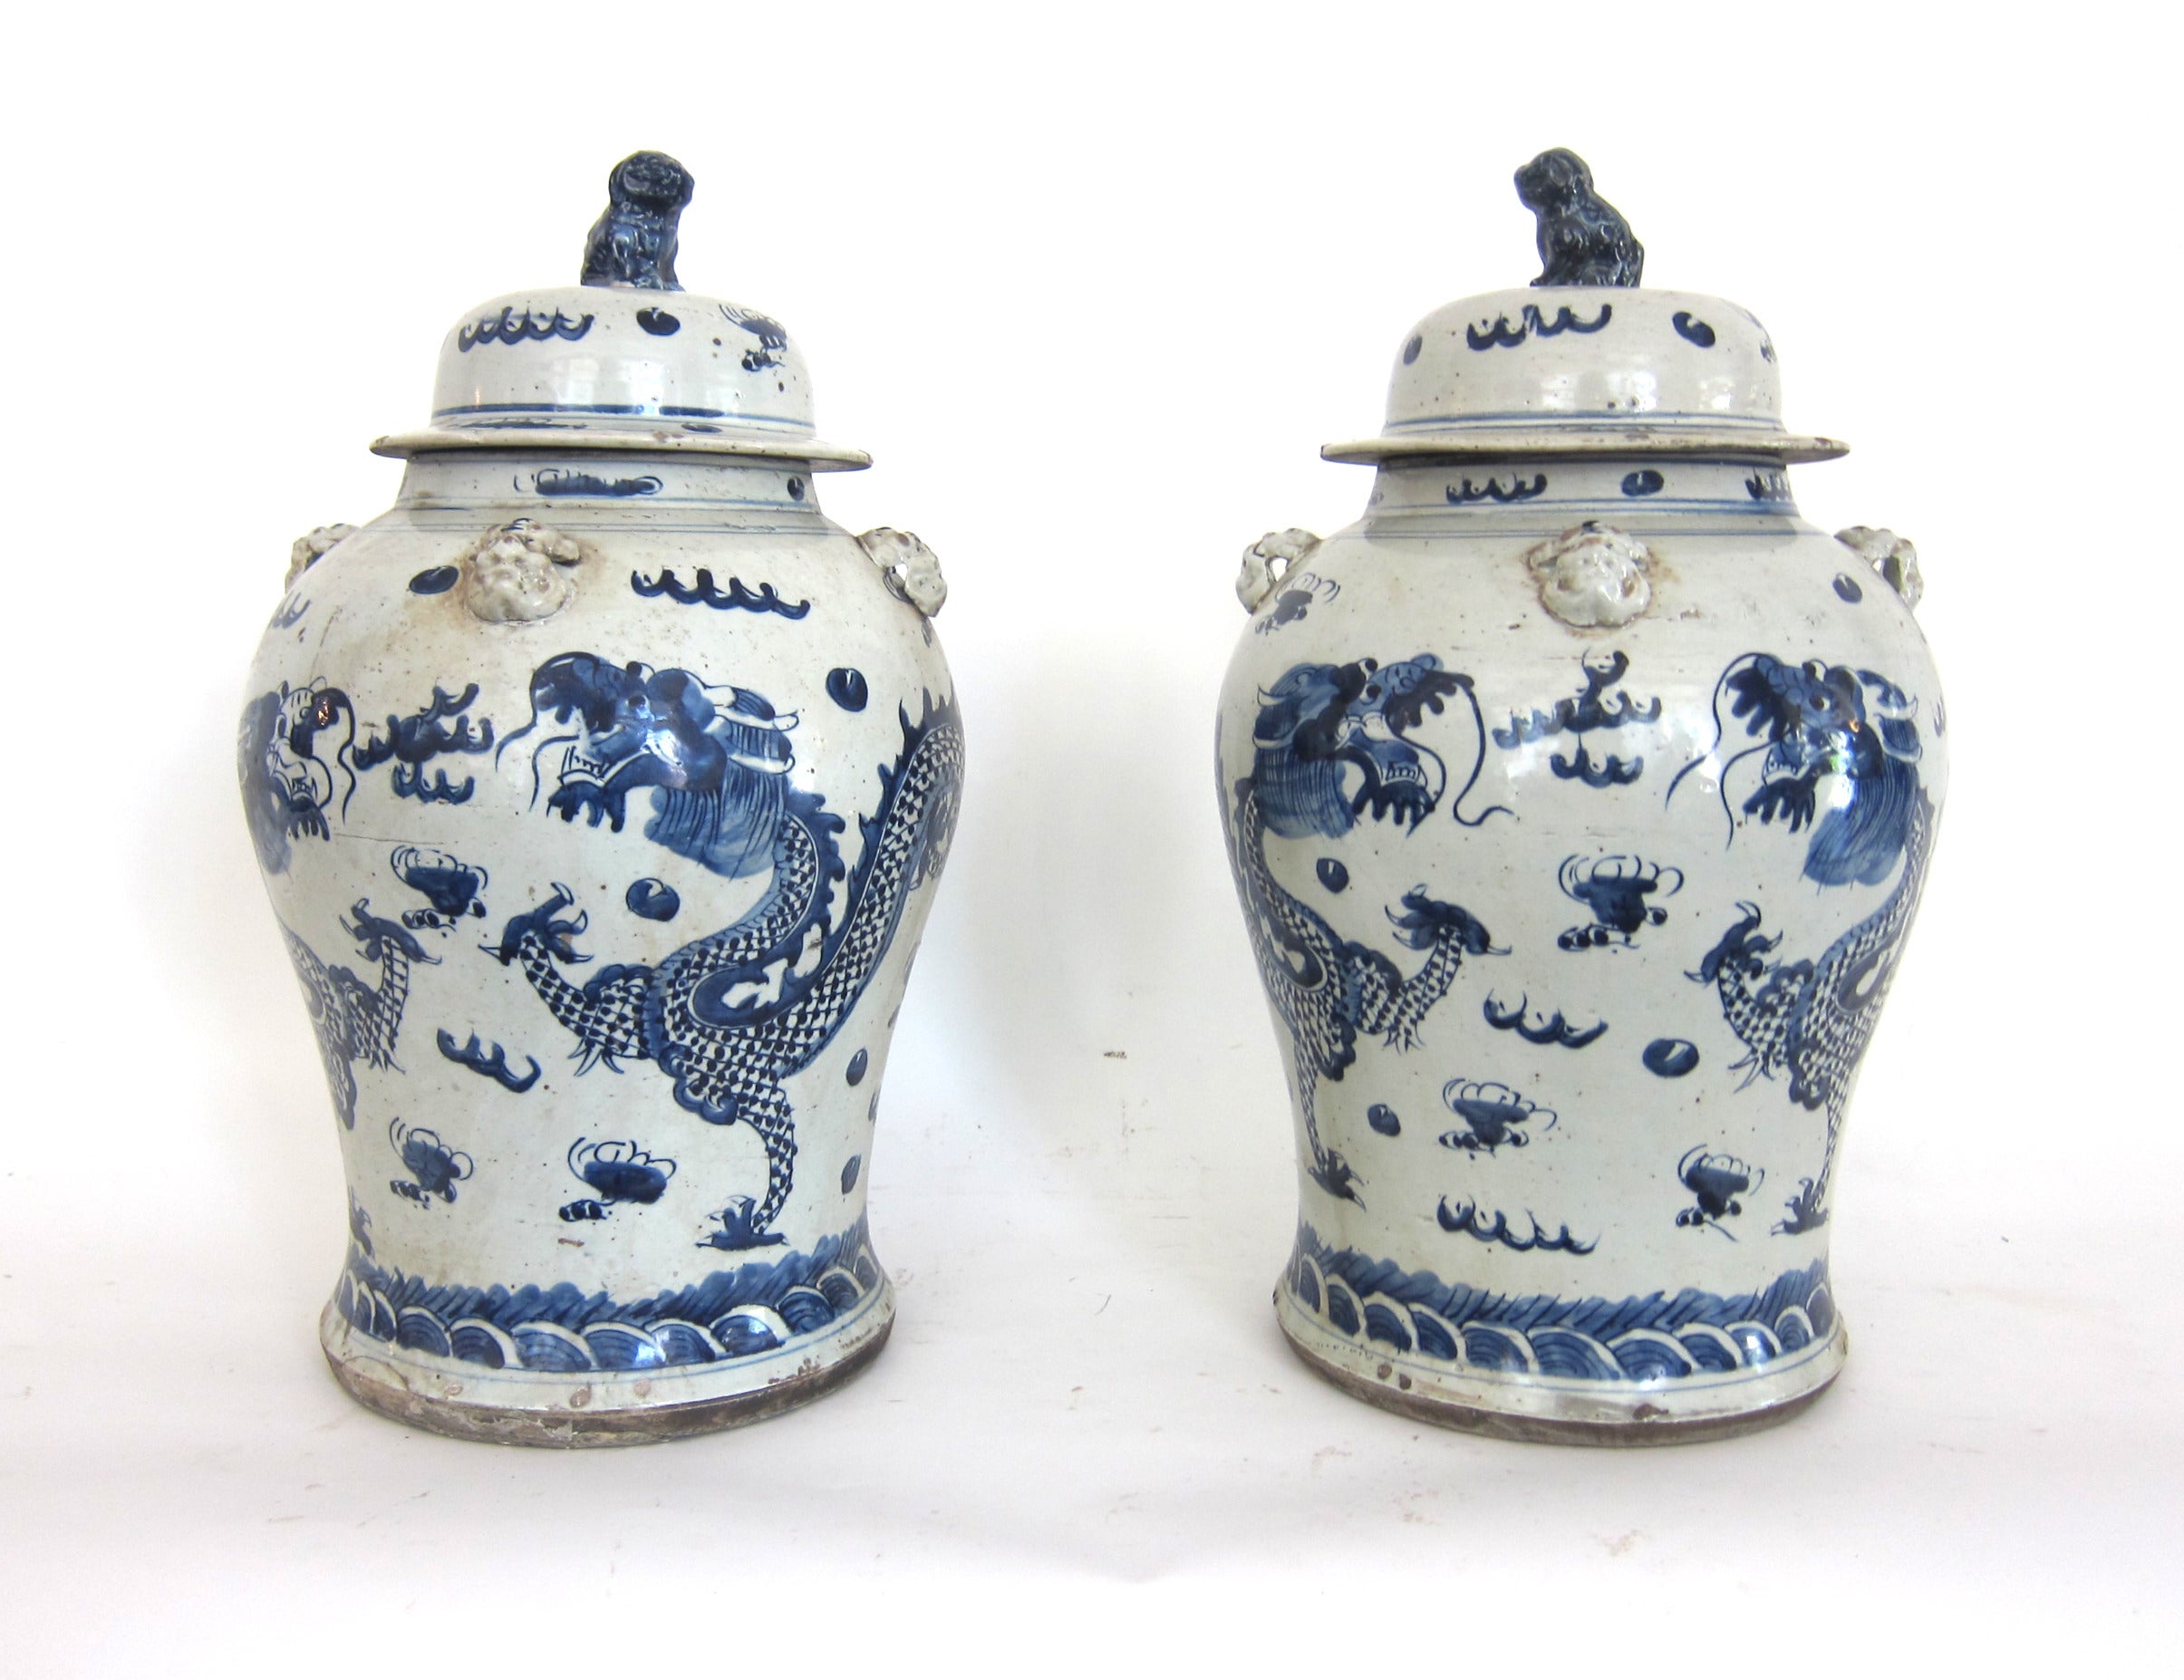 Pair of 19th Century Chinese Blue and White Dragon Jars with Lids